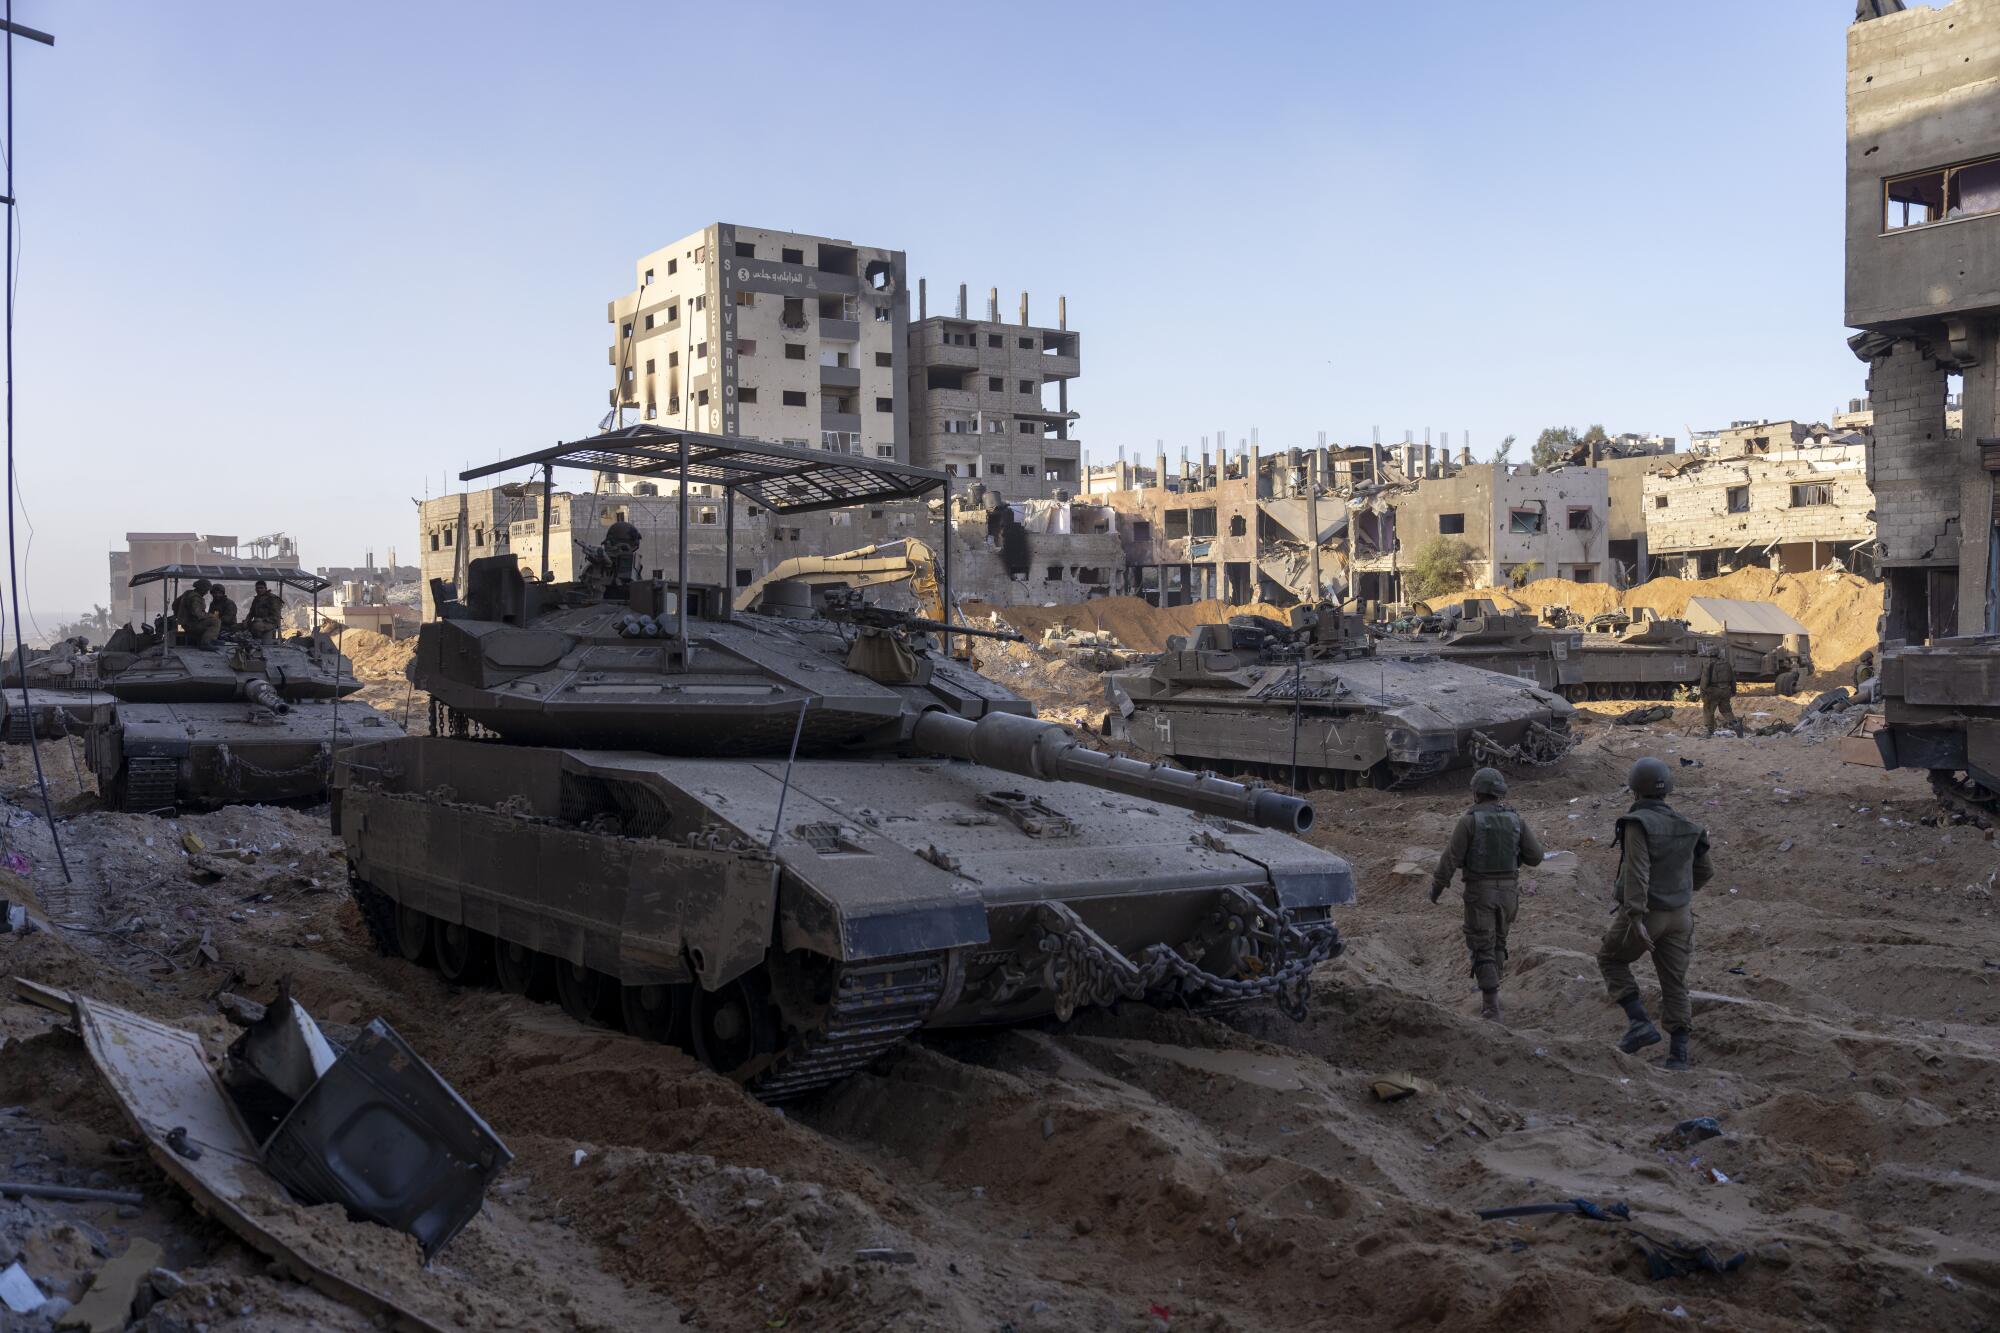 Israeli troops and armored vehicle next to a destroyed building in the Gaza Strip